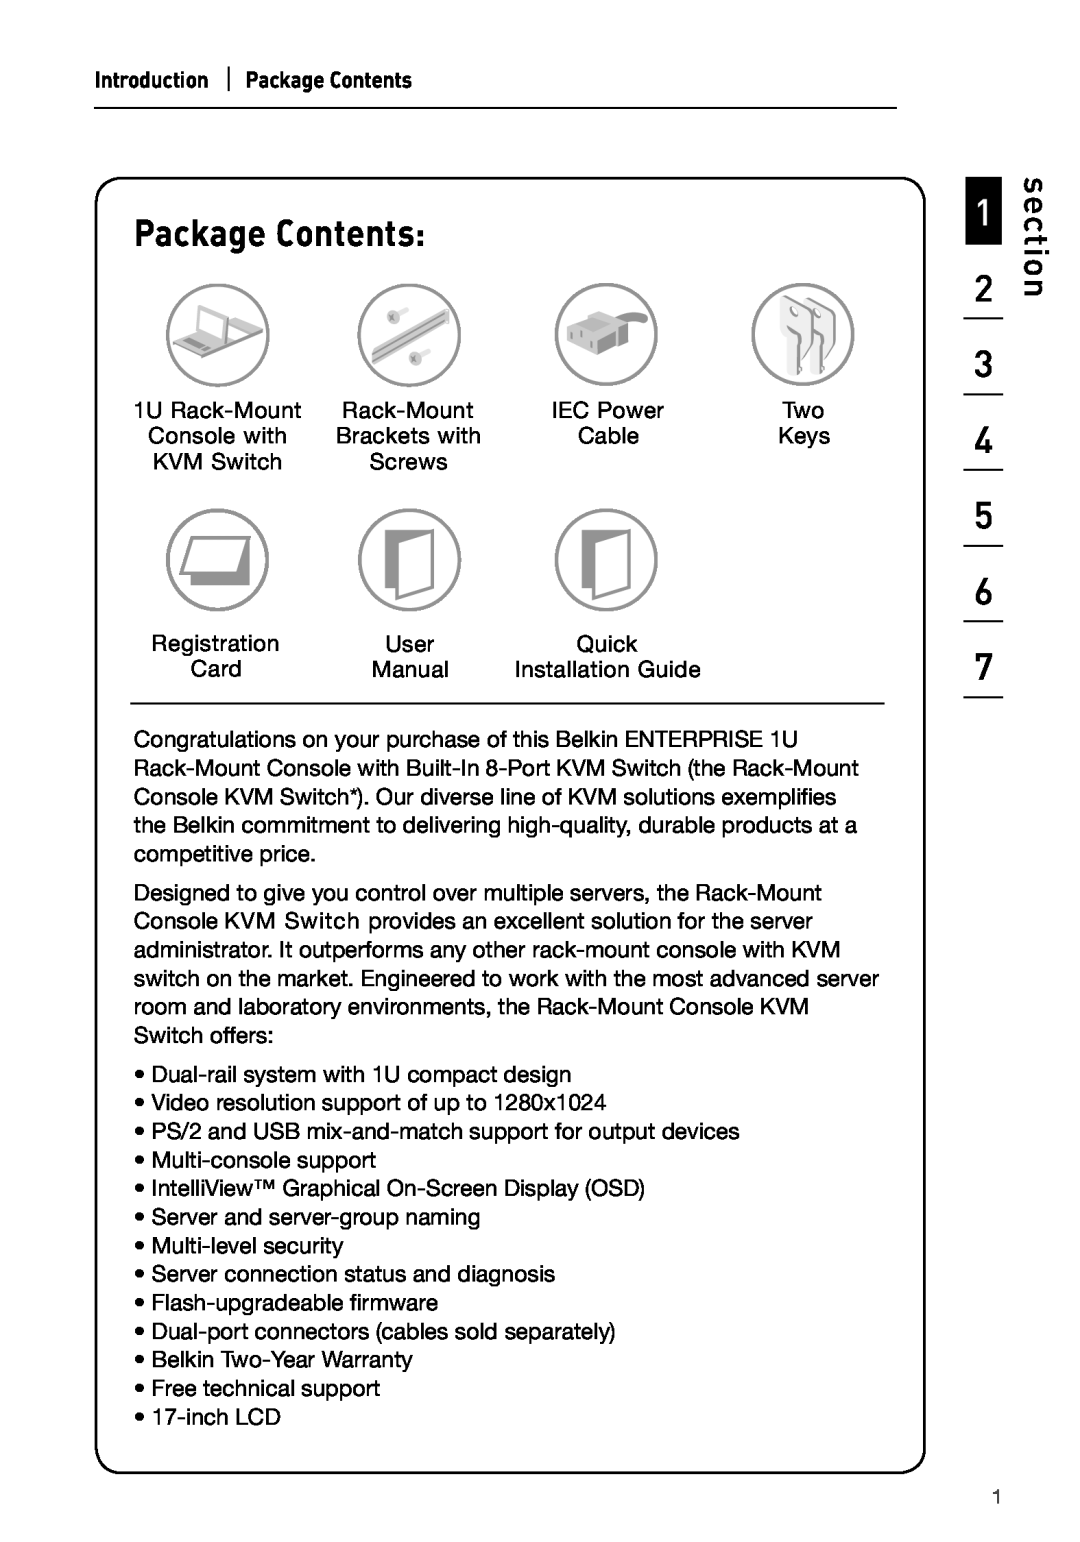 Belkin P74696 manual Package Contents, section 